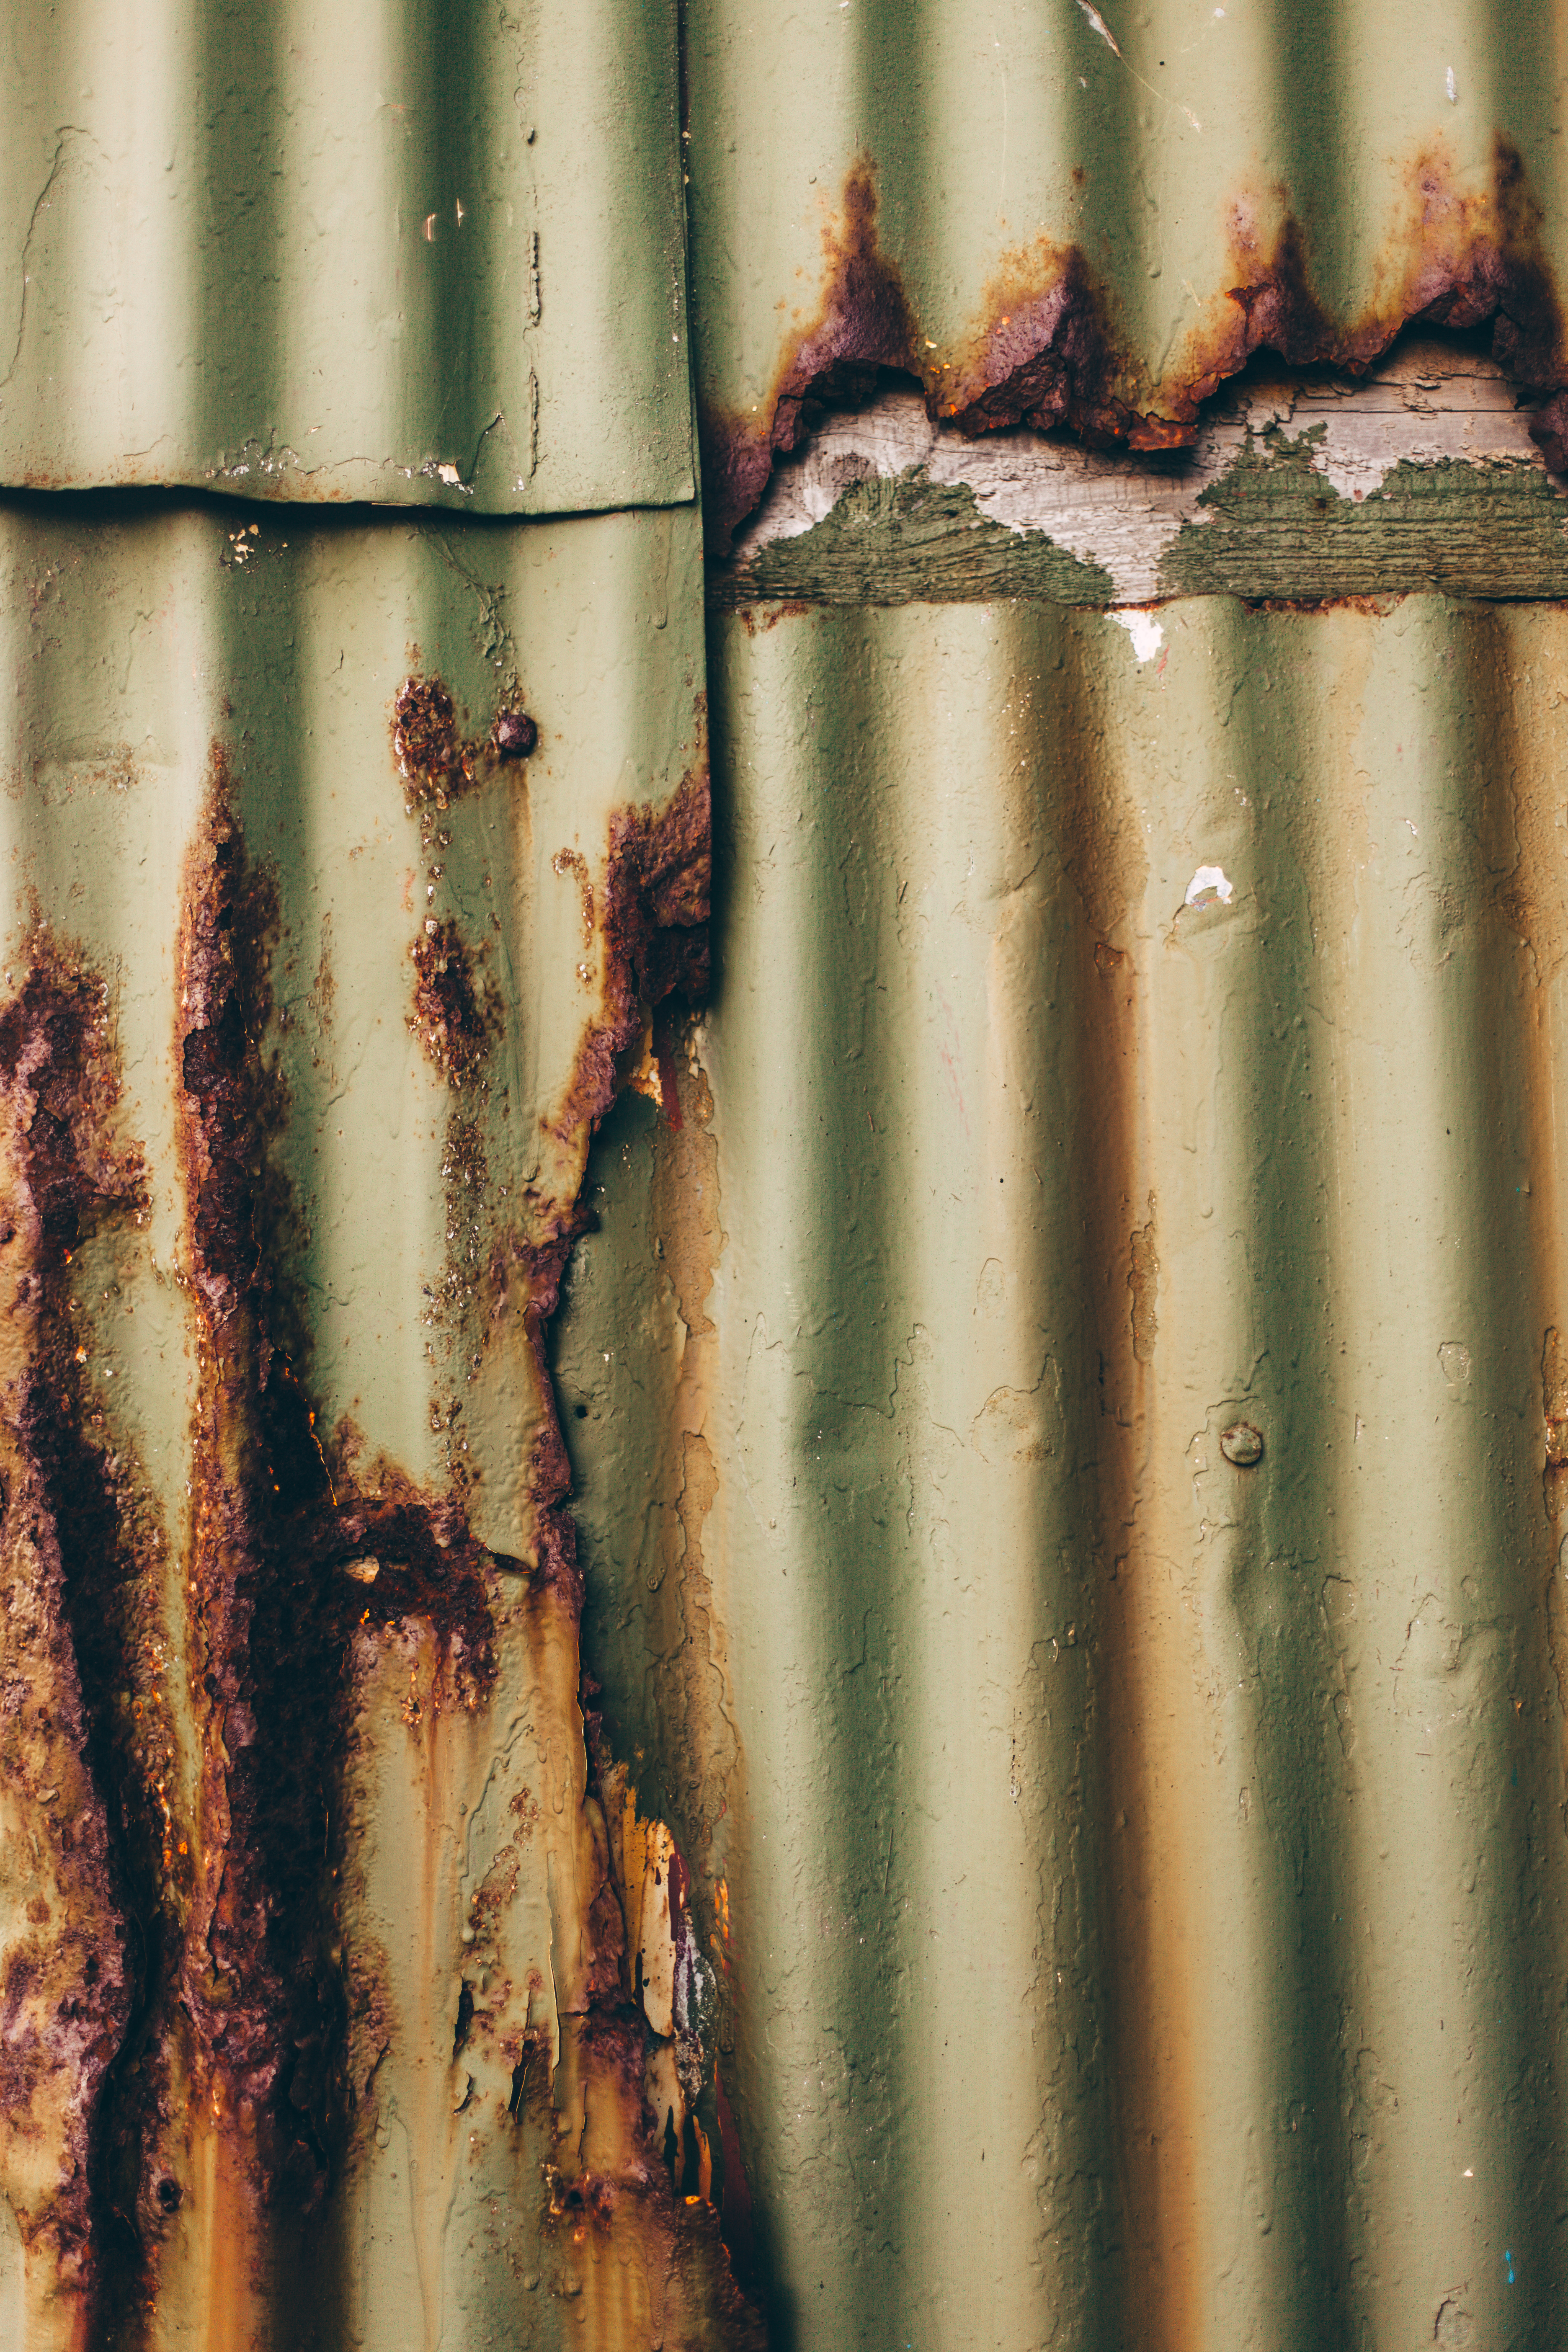 Corrugated rusted metal texture photo